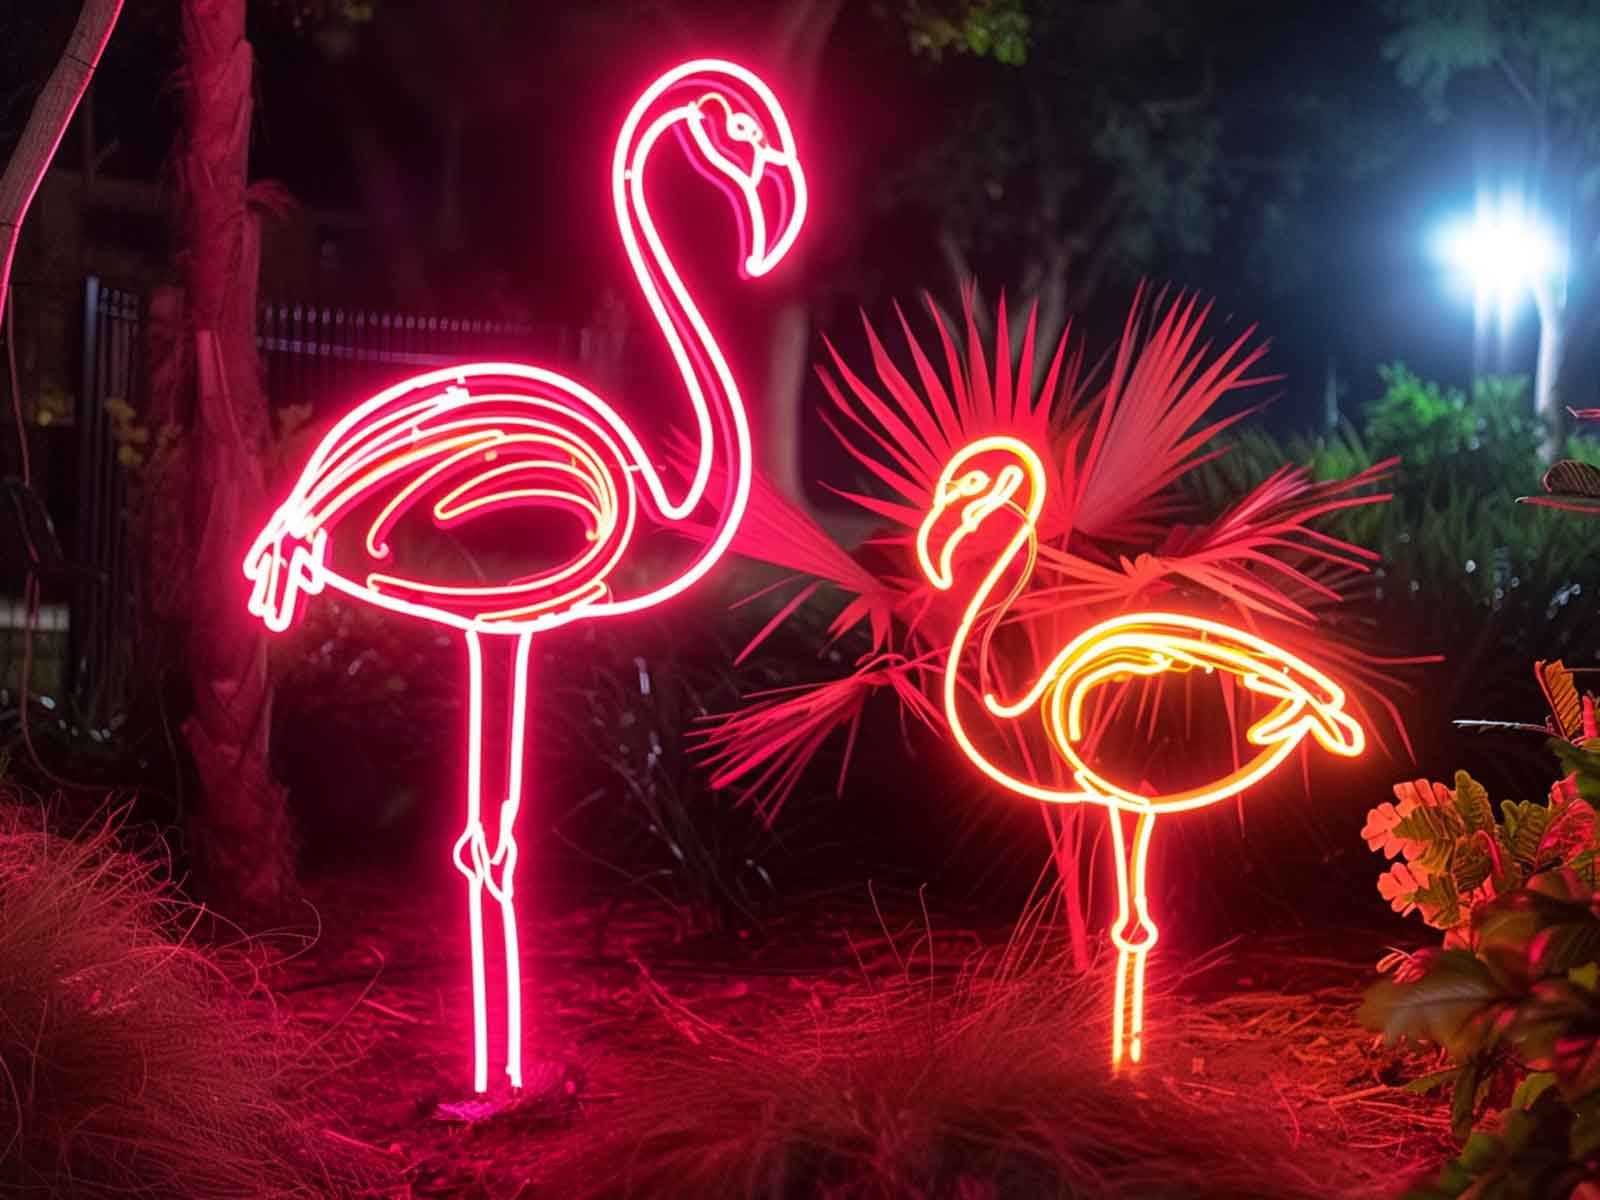 Swan-shaped LED neon lights installed in a garden